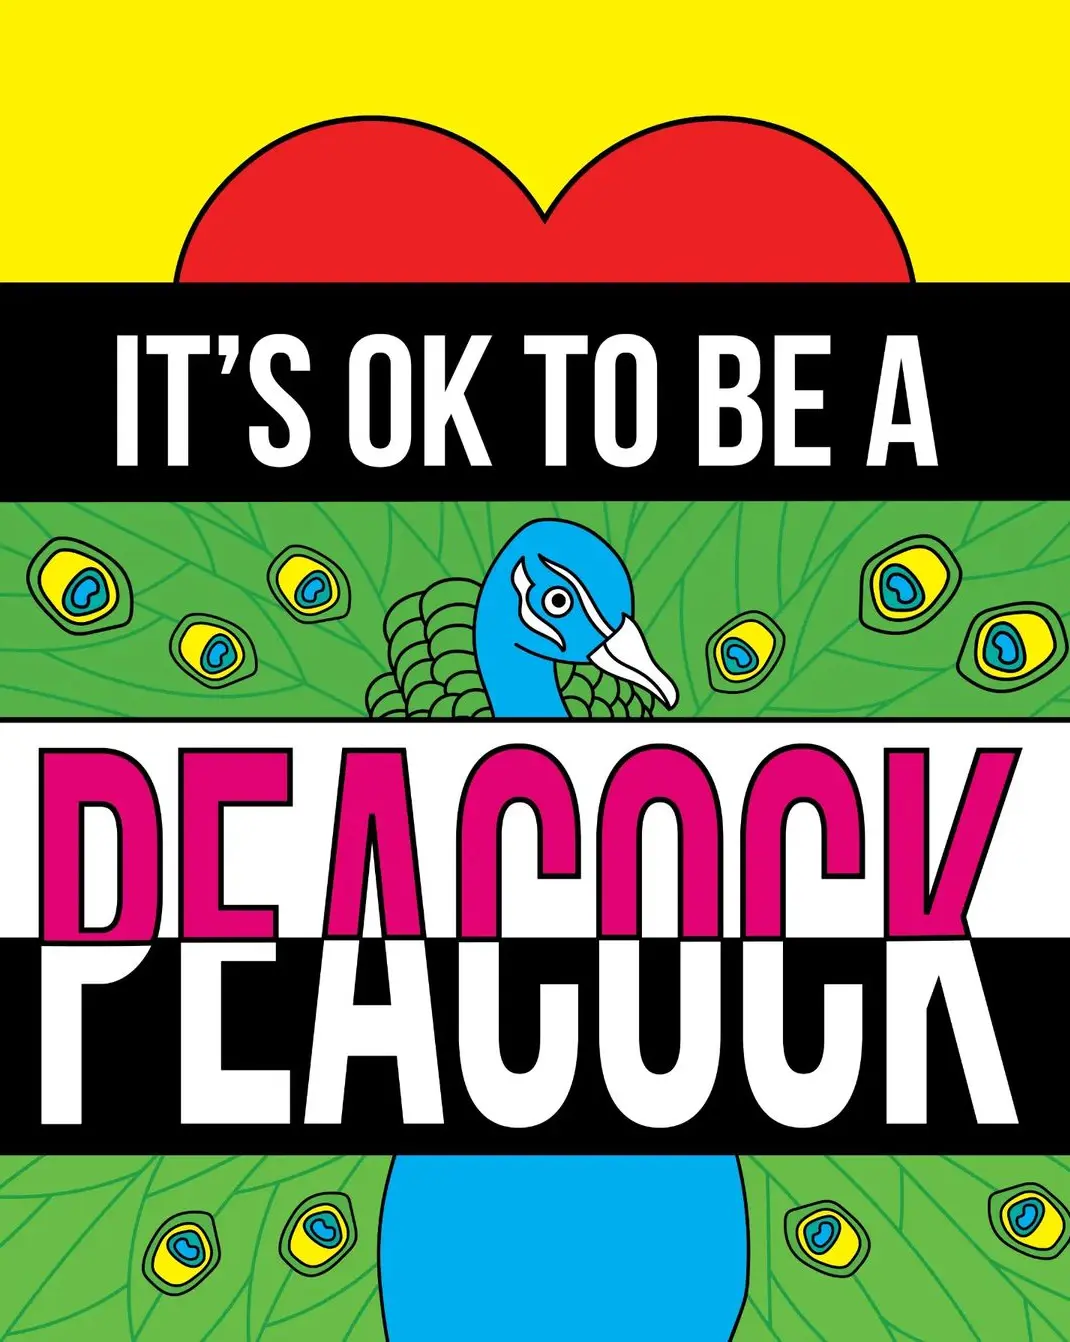 'It's okay to be a peacockl' graphic illustration by Frida Las Vegas